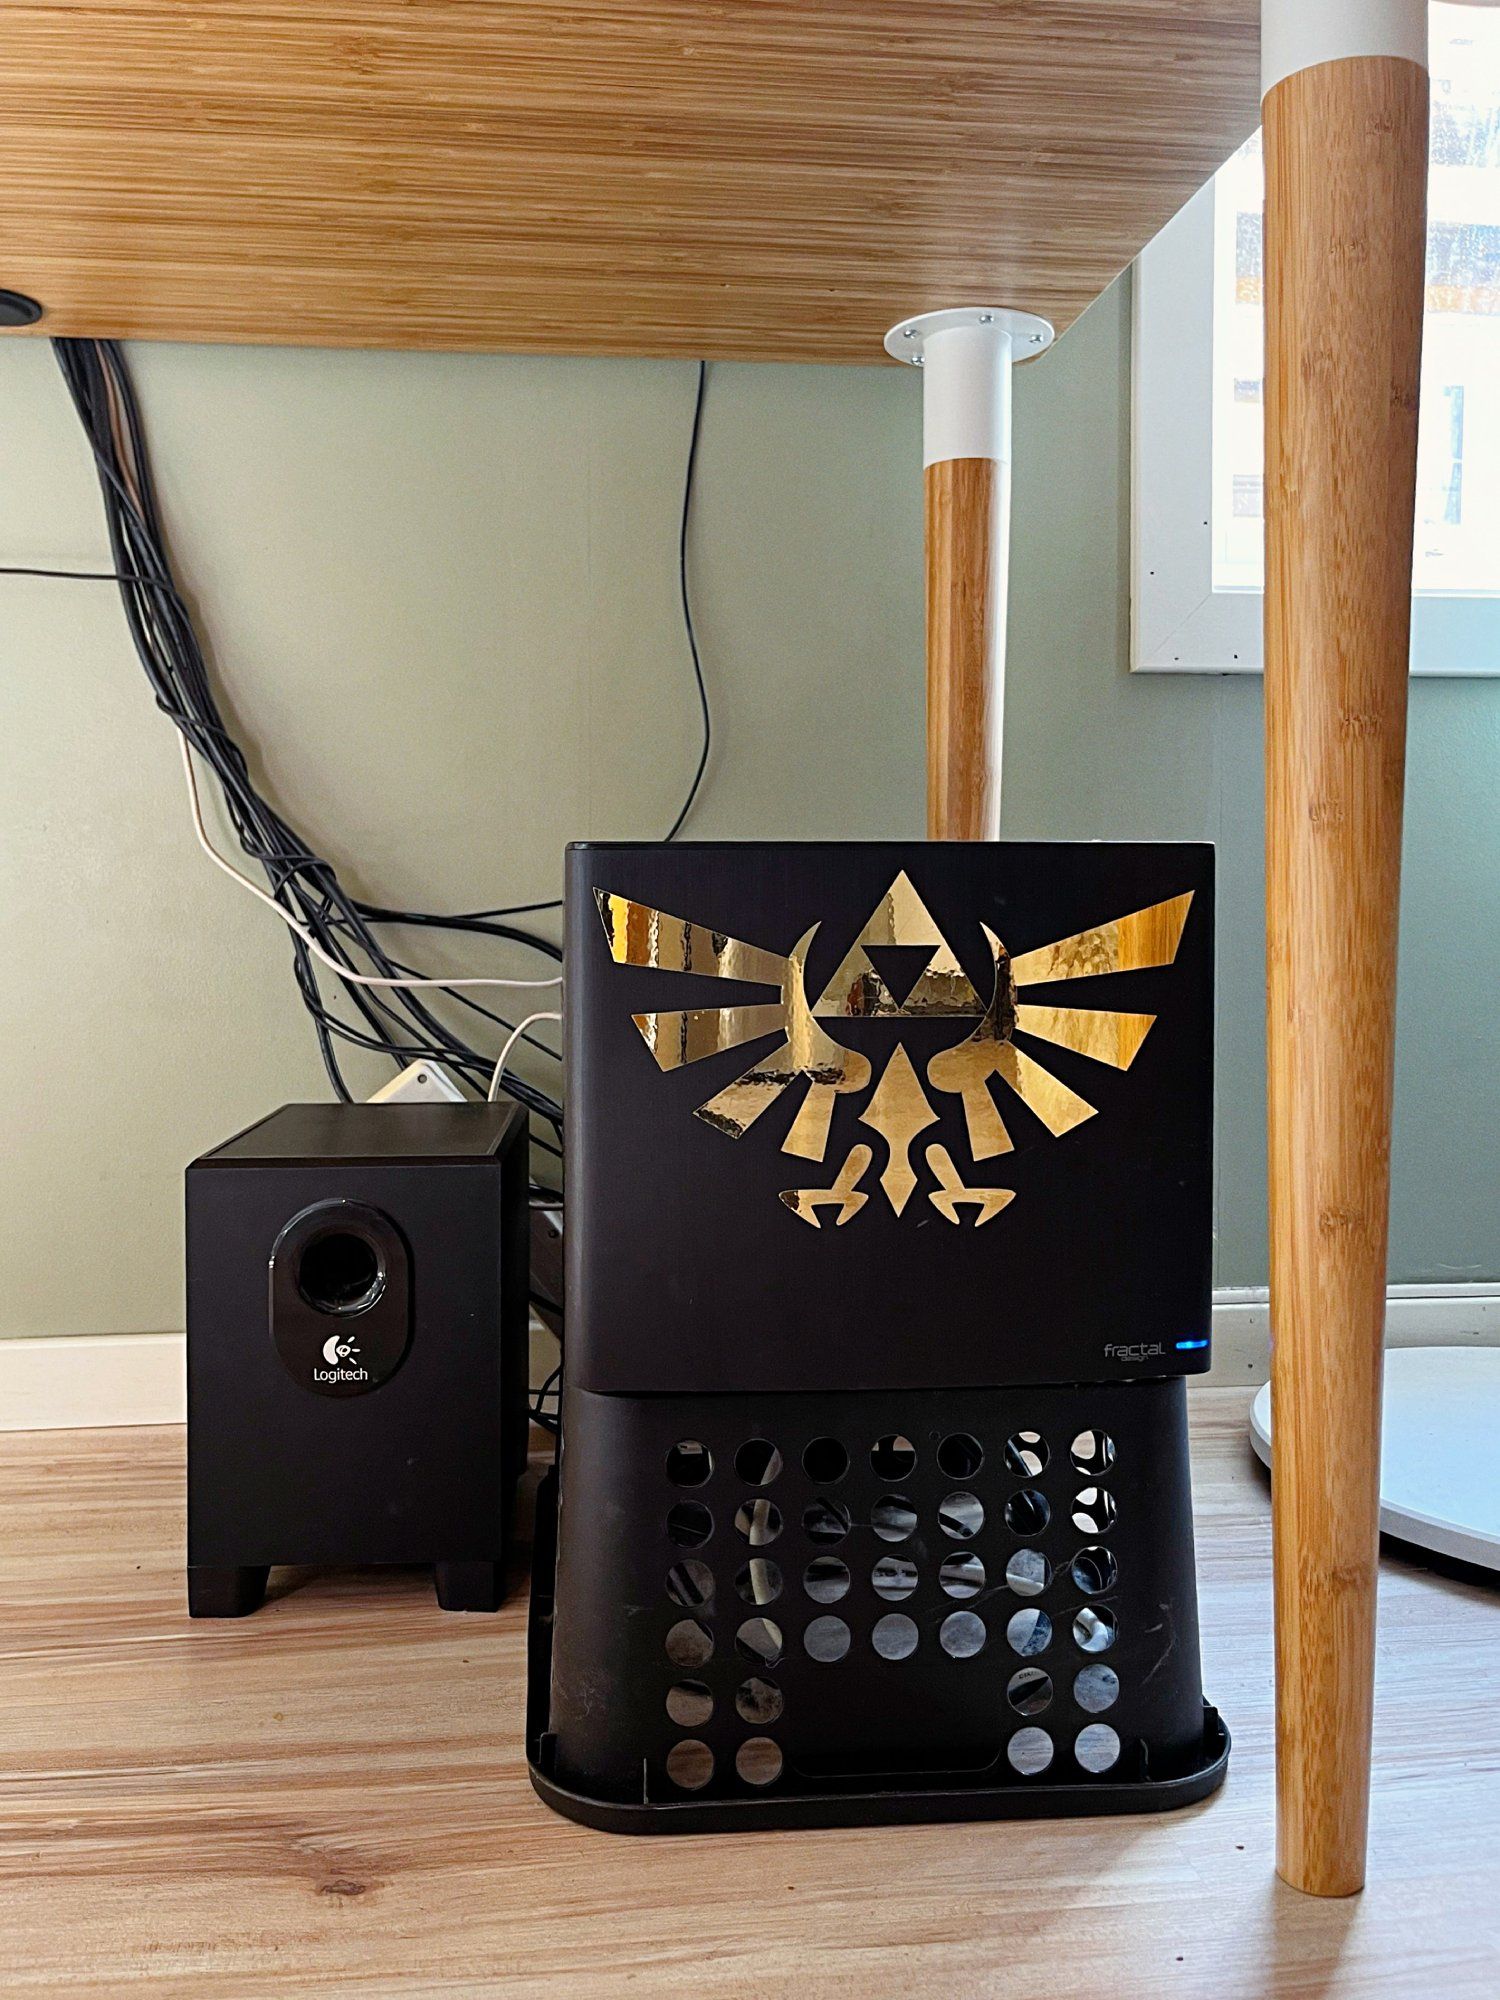  A Logitech subwoofer and a Zelda-inspired PC case